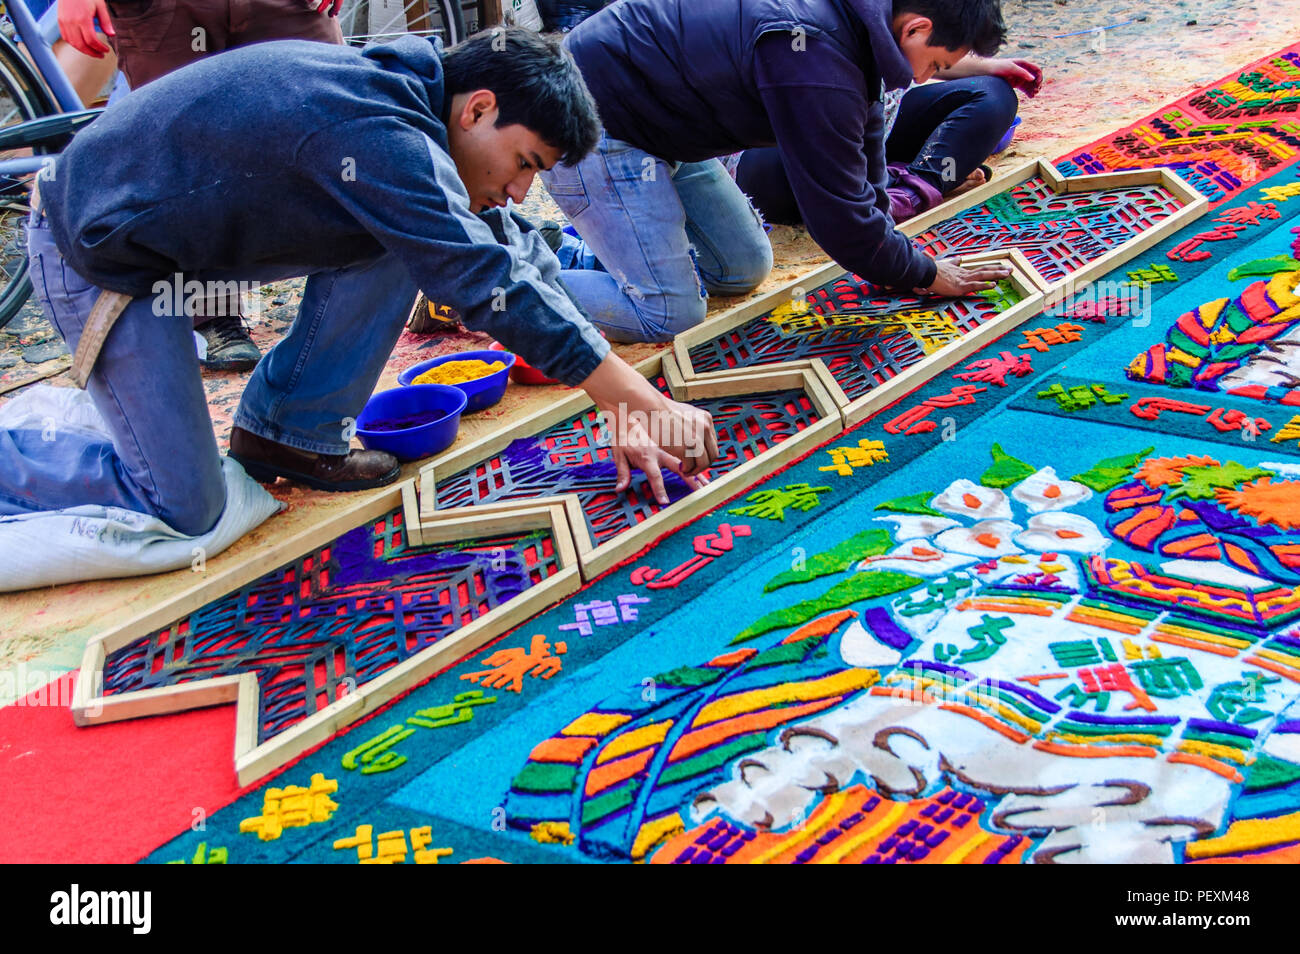 Antigua, Guatemala -  April 1, 2012: Making Palm Sunday procession carpet in UNESCO World Heritage Site with famous Holy Week celebrations. Stock Photo